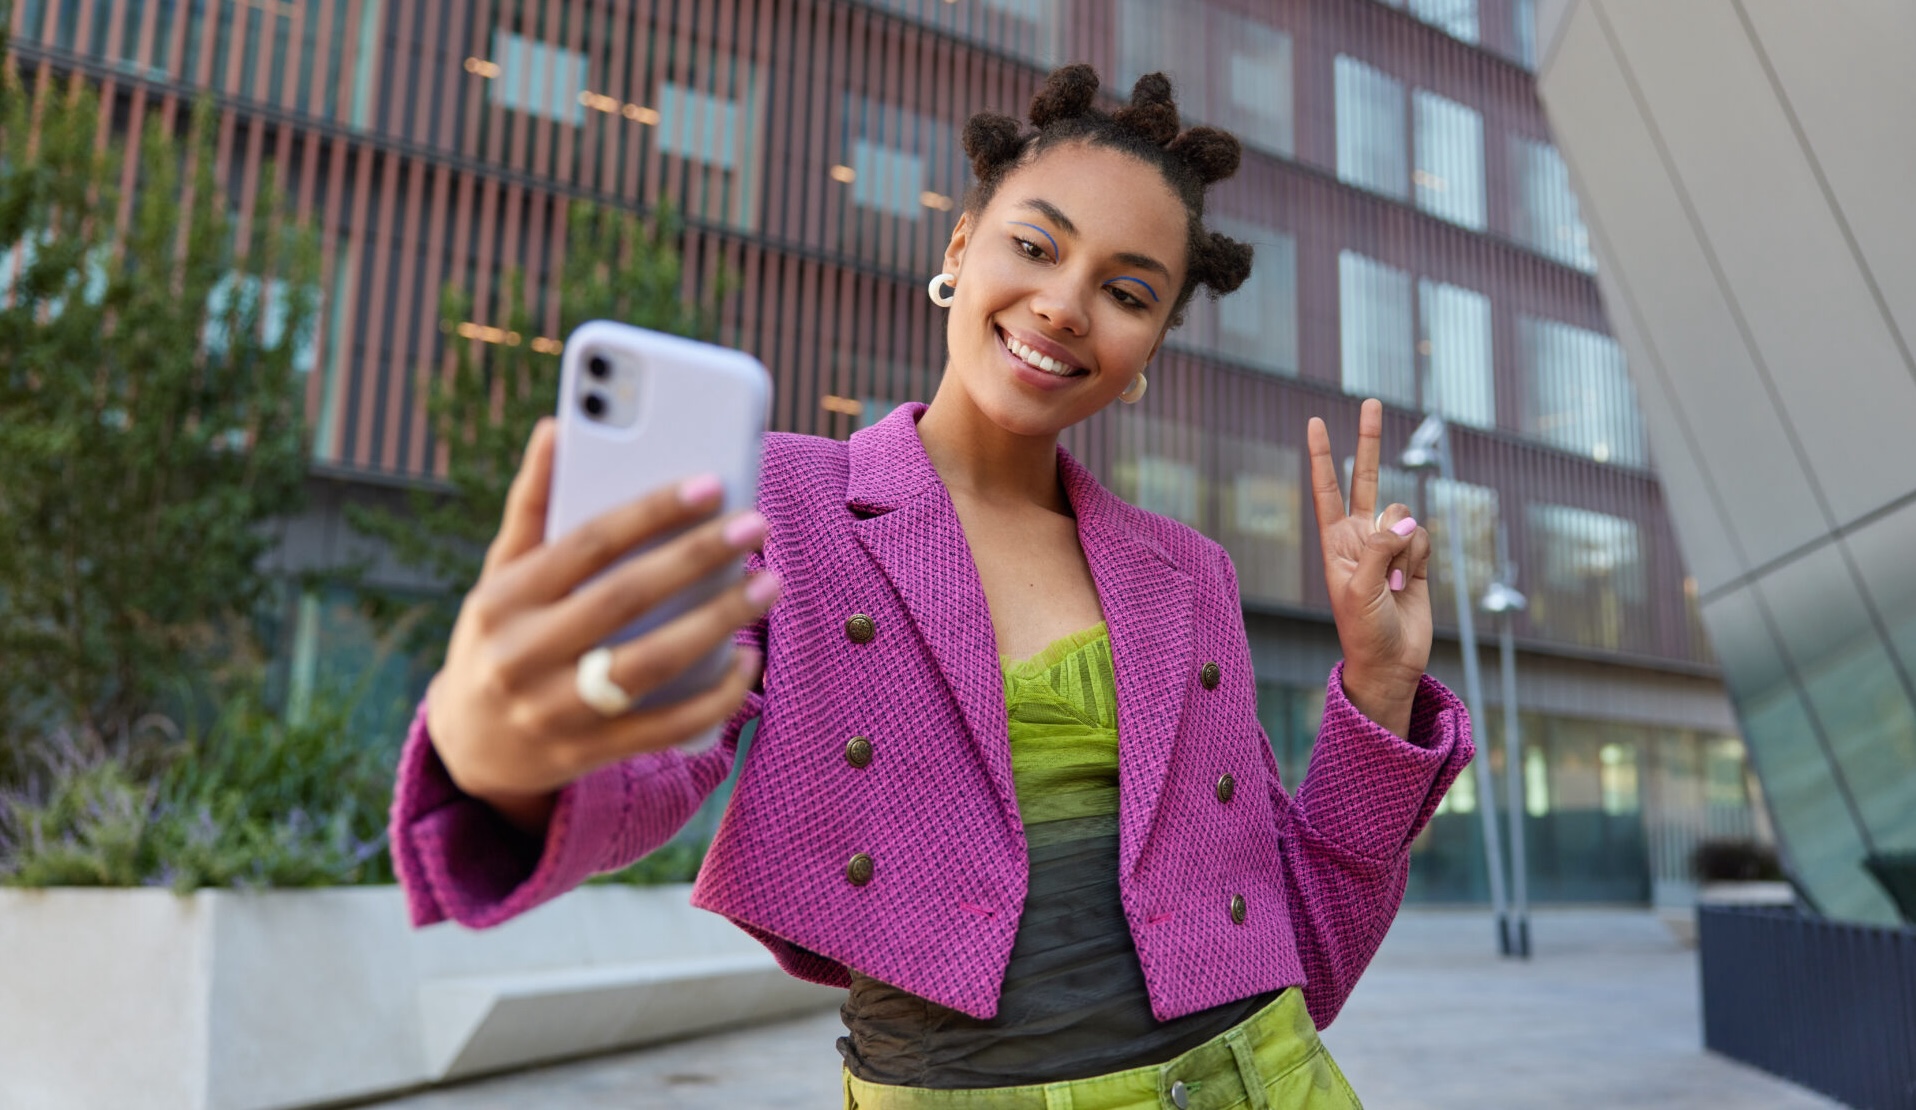 Attractive girl in fashionable outfit creats influence content shows peace sign at smartphone front camera poses for selfie smiles gladfully poses at urban place spends vacation at big city.